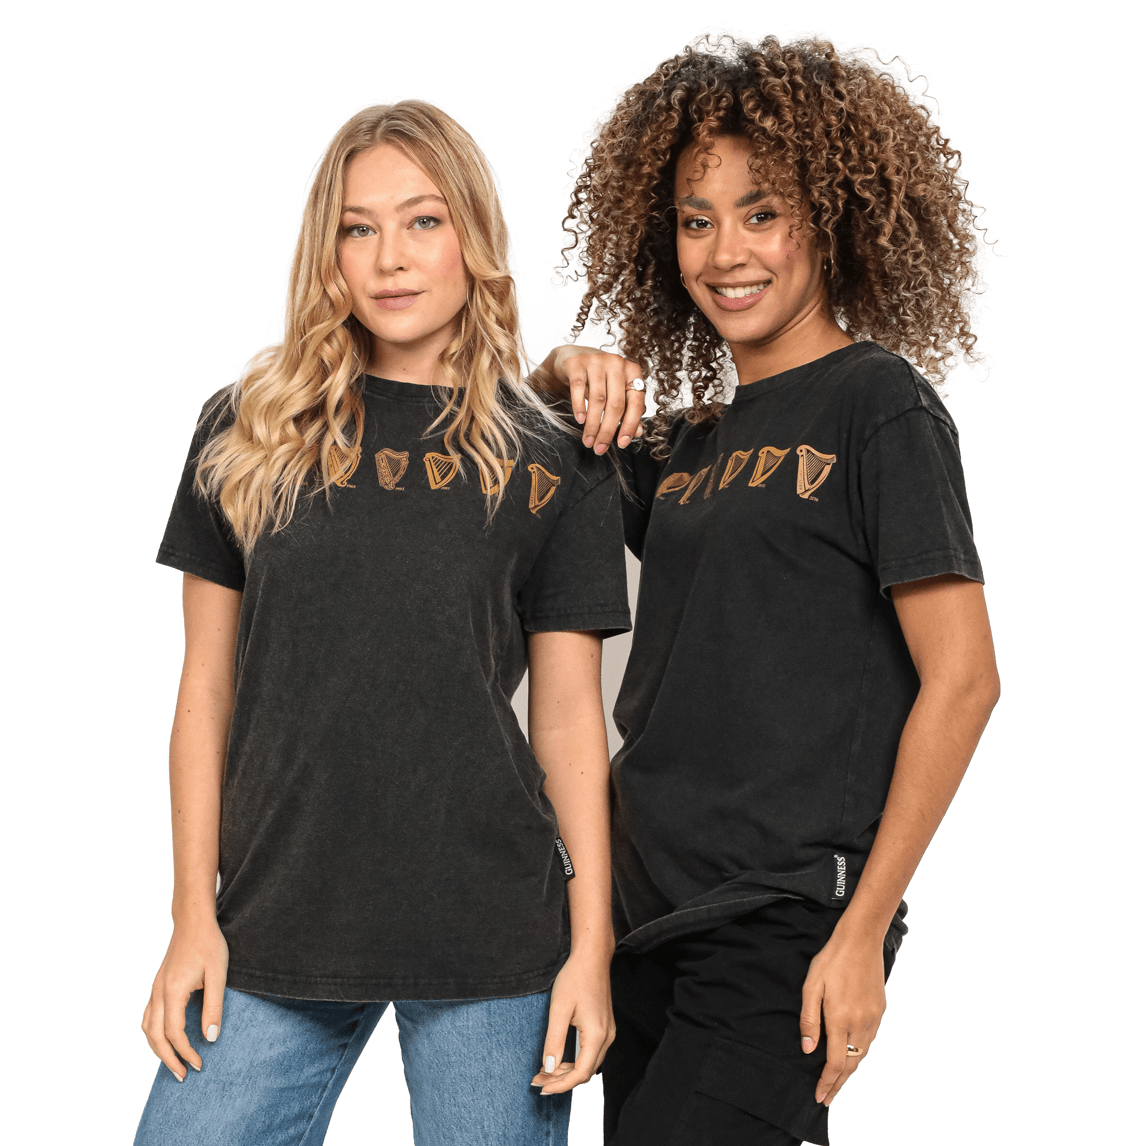 Two women standing next to each other wearing black Guinness Evolution Harp Tees.